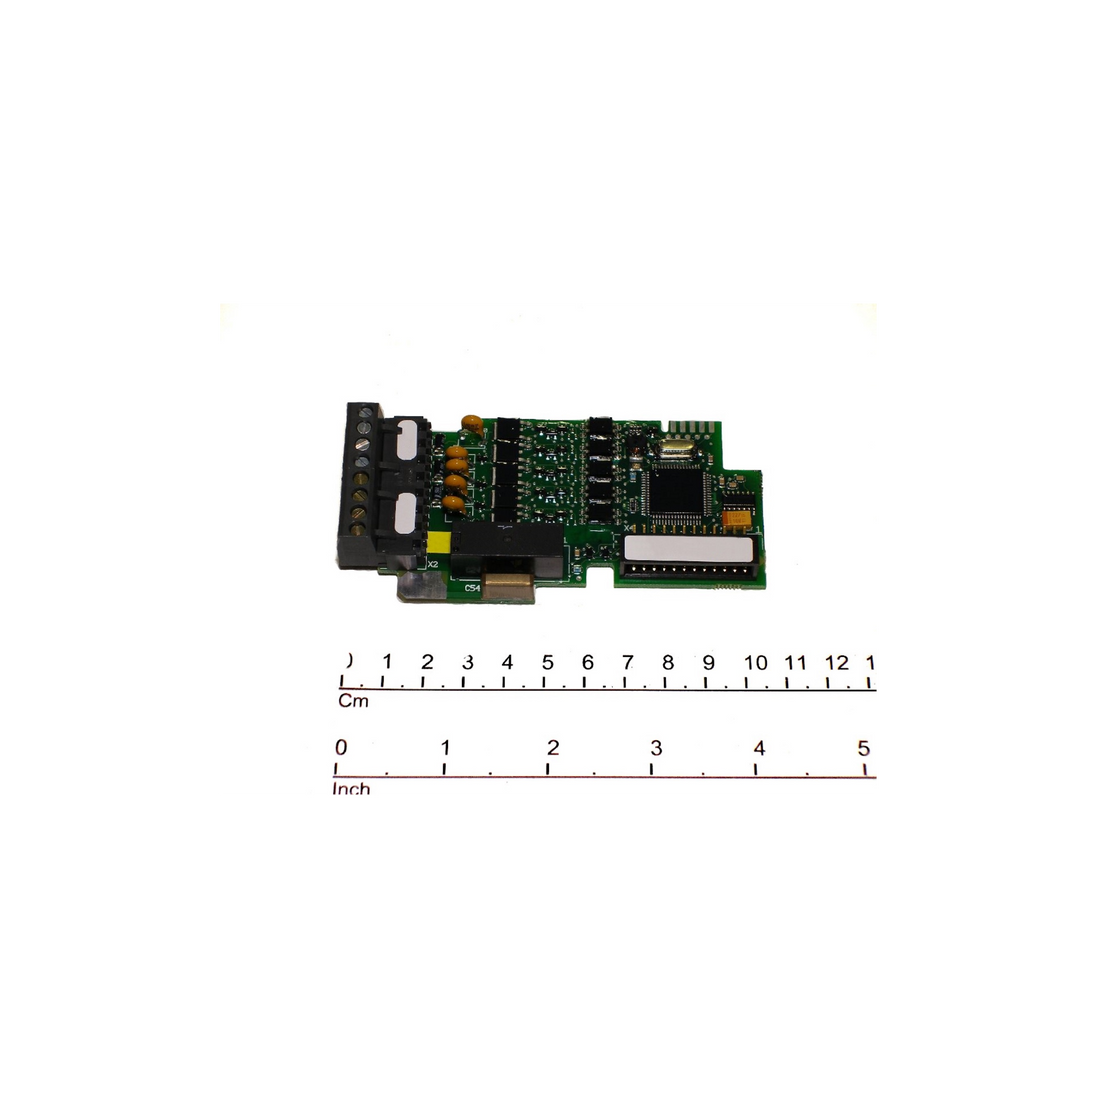 R&M Parts - I/O Extension Board, Part Number: 52305691